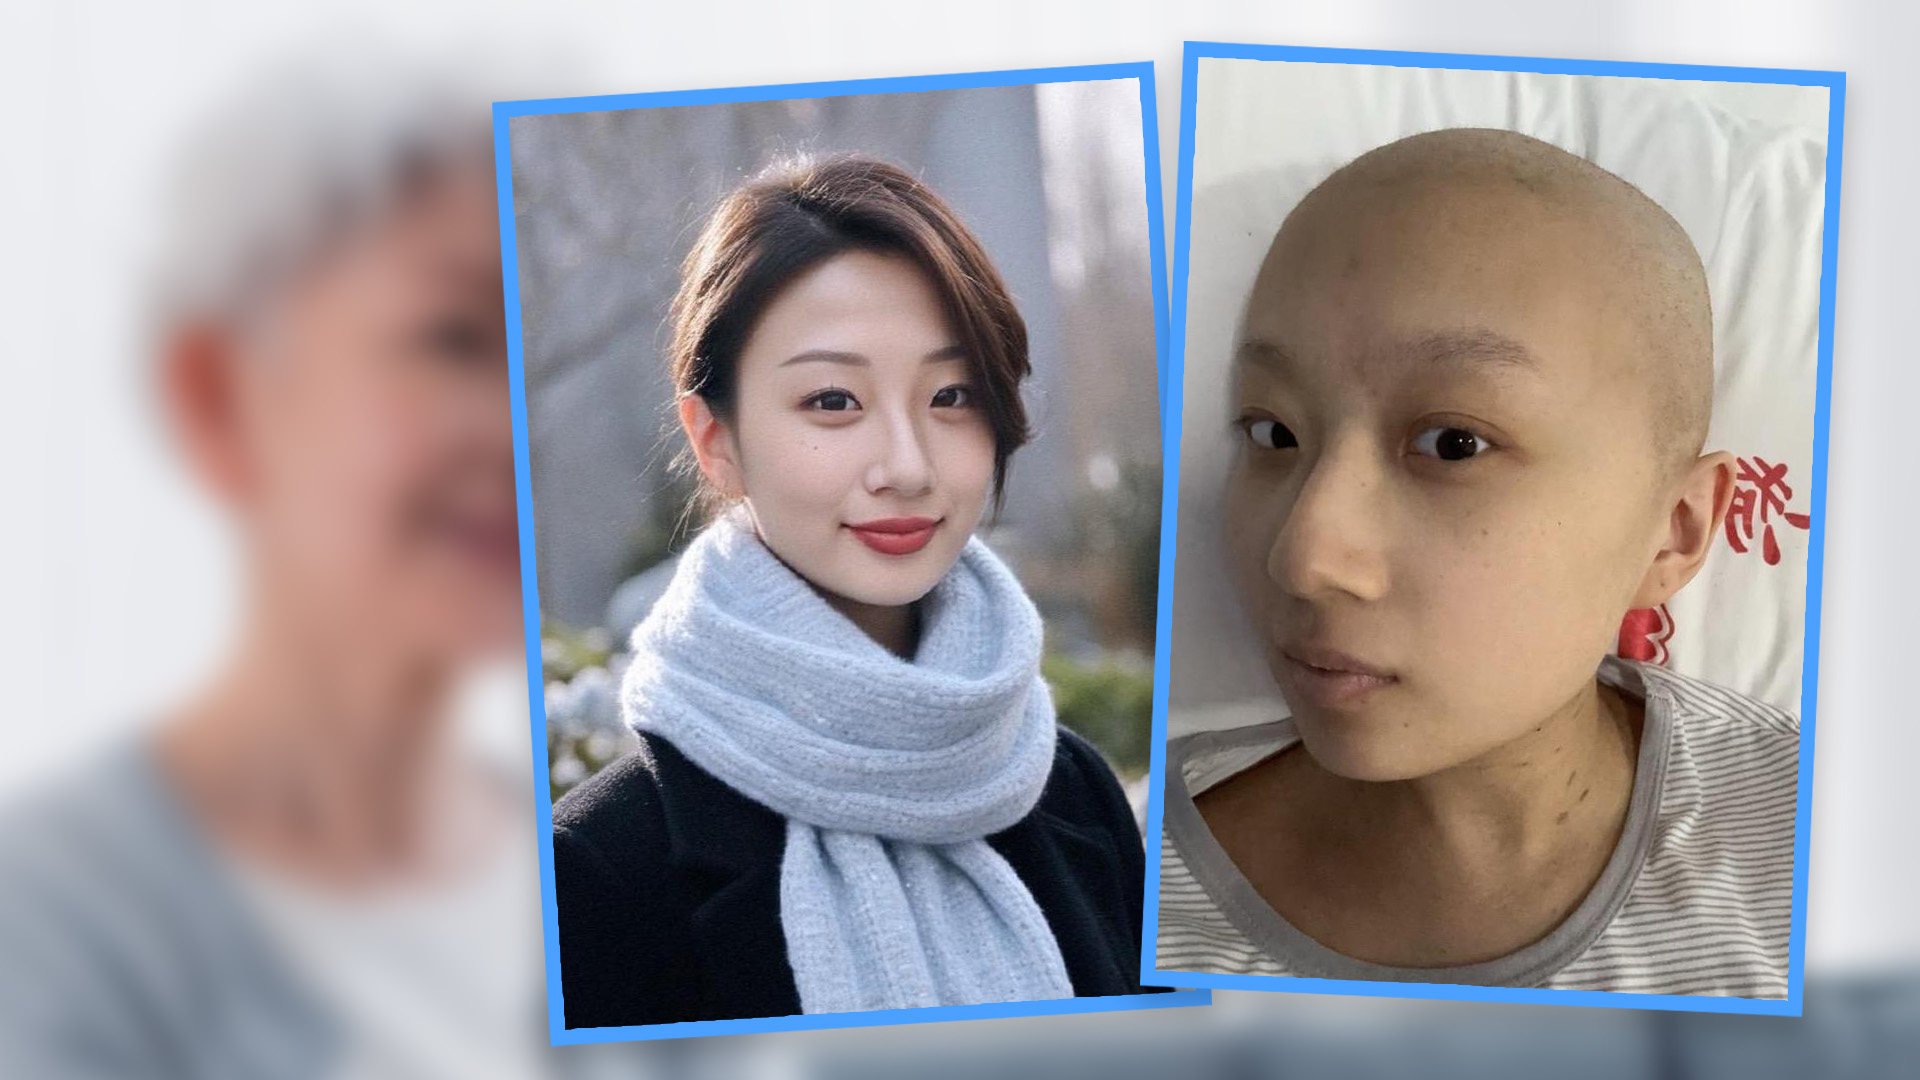 A cancer-hit woman in China whose looks were dramatically changed by her treatment has turned to artificial intelligence to soften the blow for her 86-year-old grandmother. Photo: SCMP composite/Shutterstock/Weibo